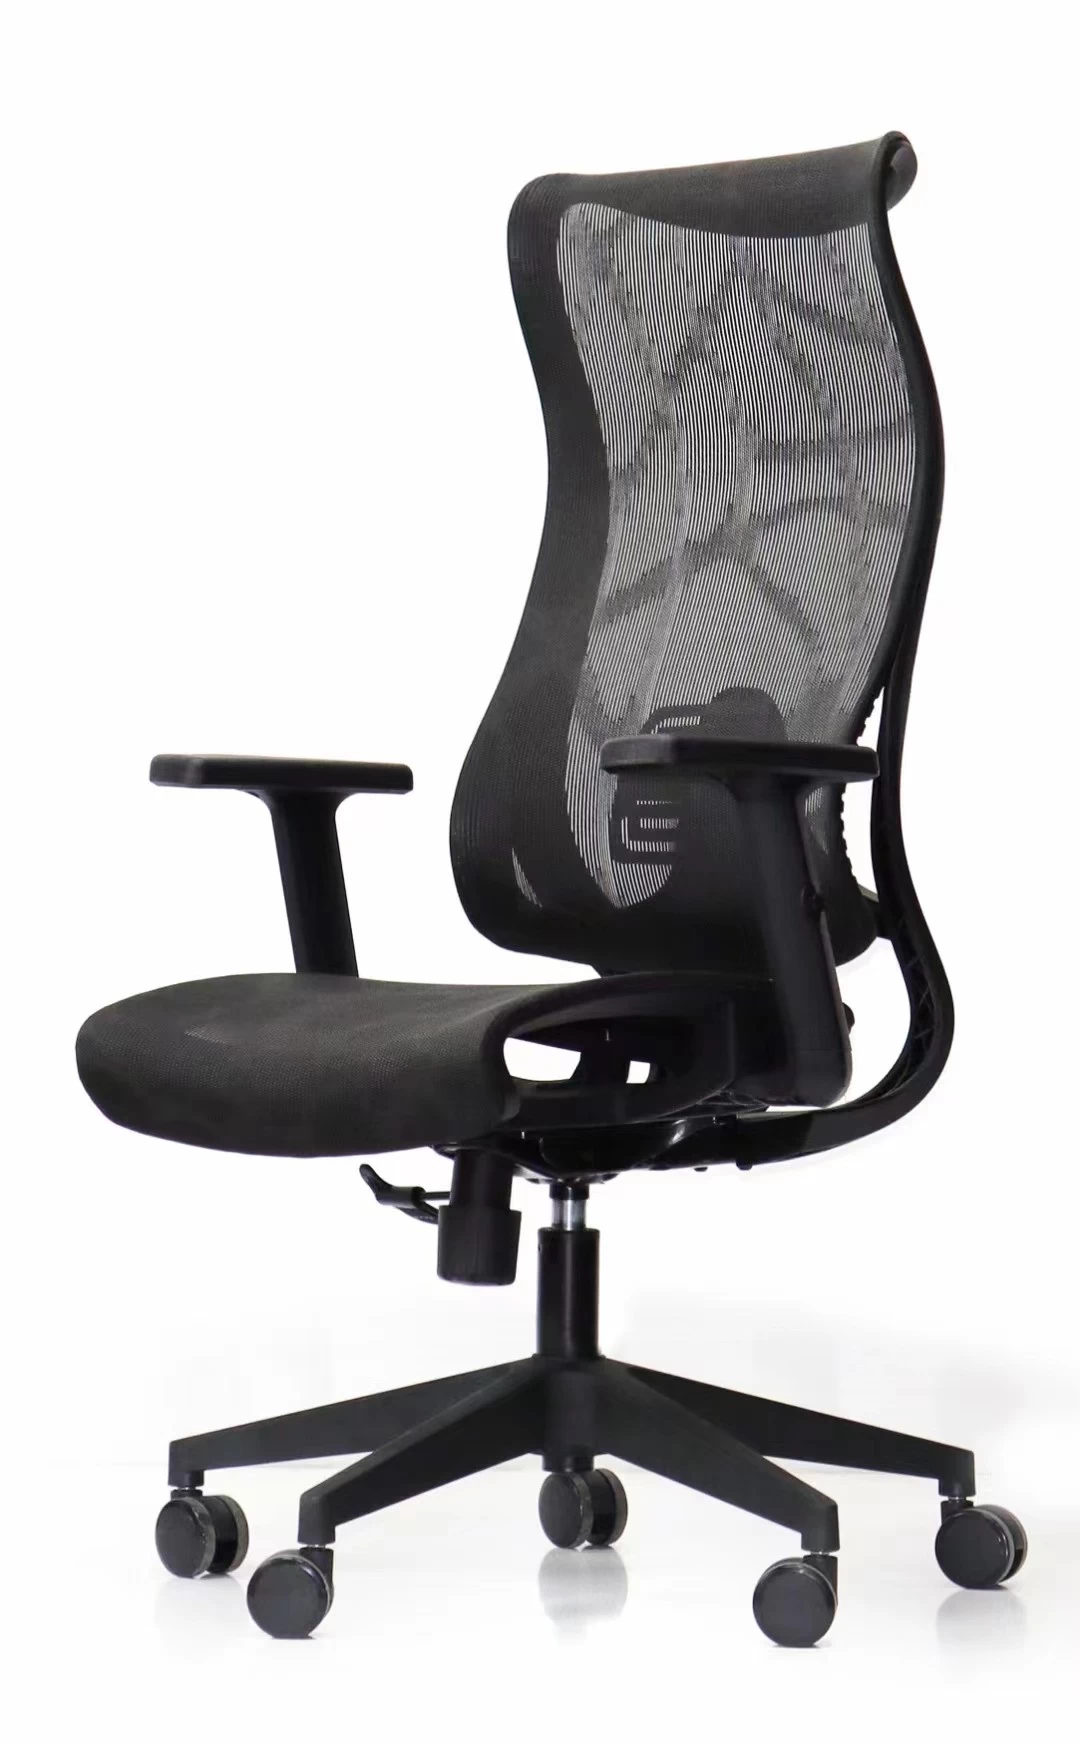 Newcity 639AF Executive Manager Mesh Chair Comfortable Modern Fabric Mesh Chair High Back New Design Adjustable Armrest Mesh Chair Foshan China